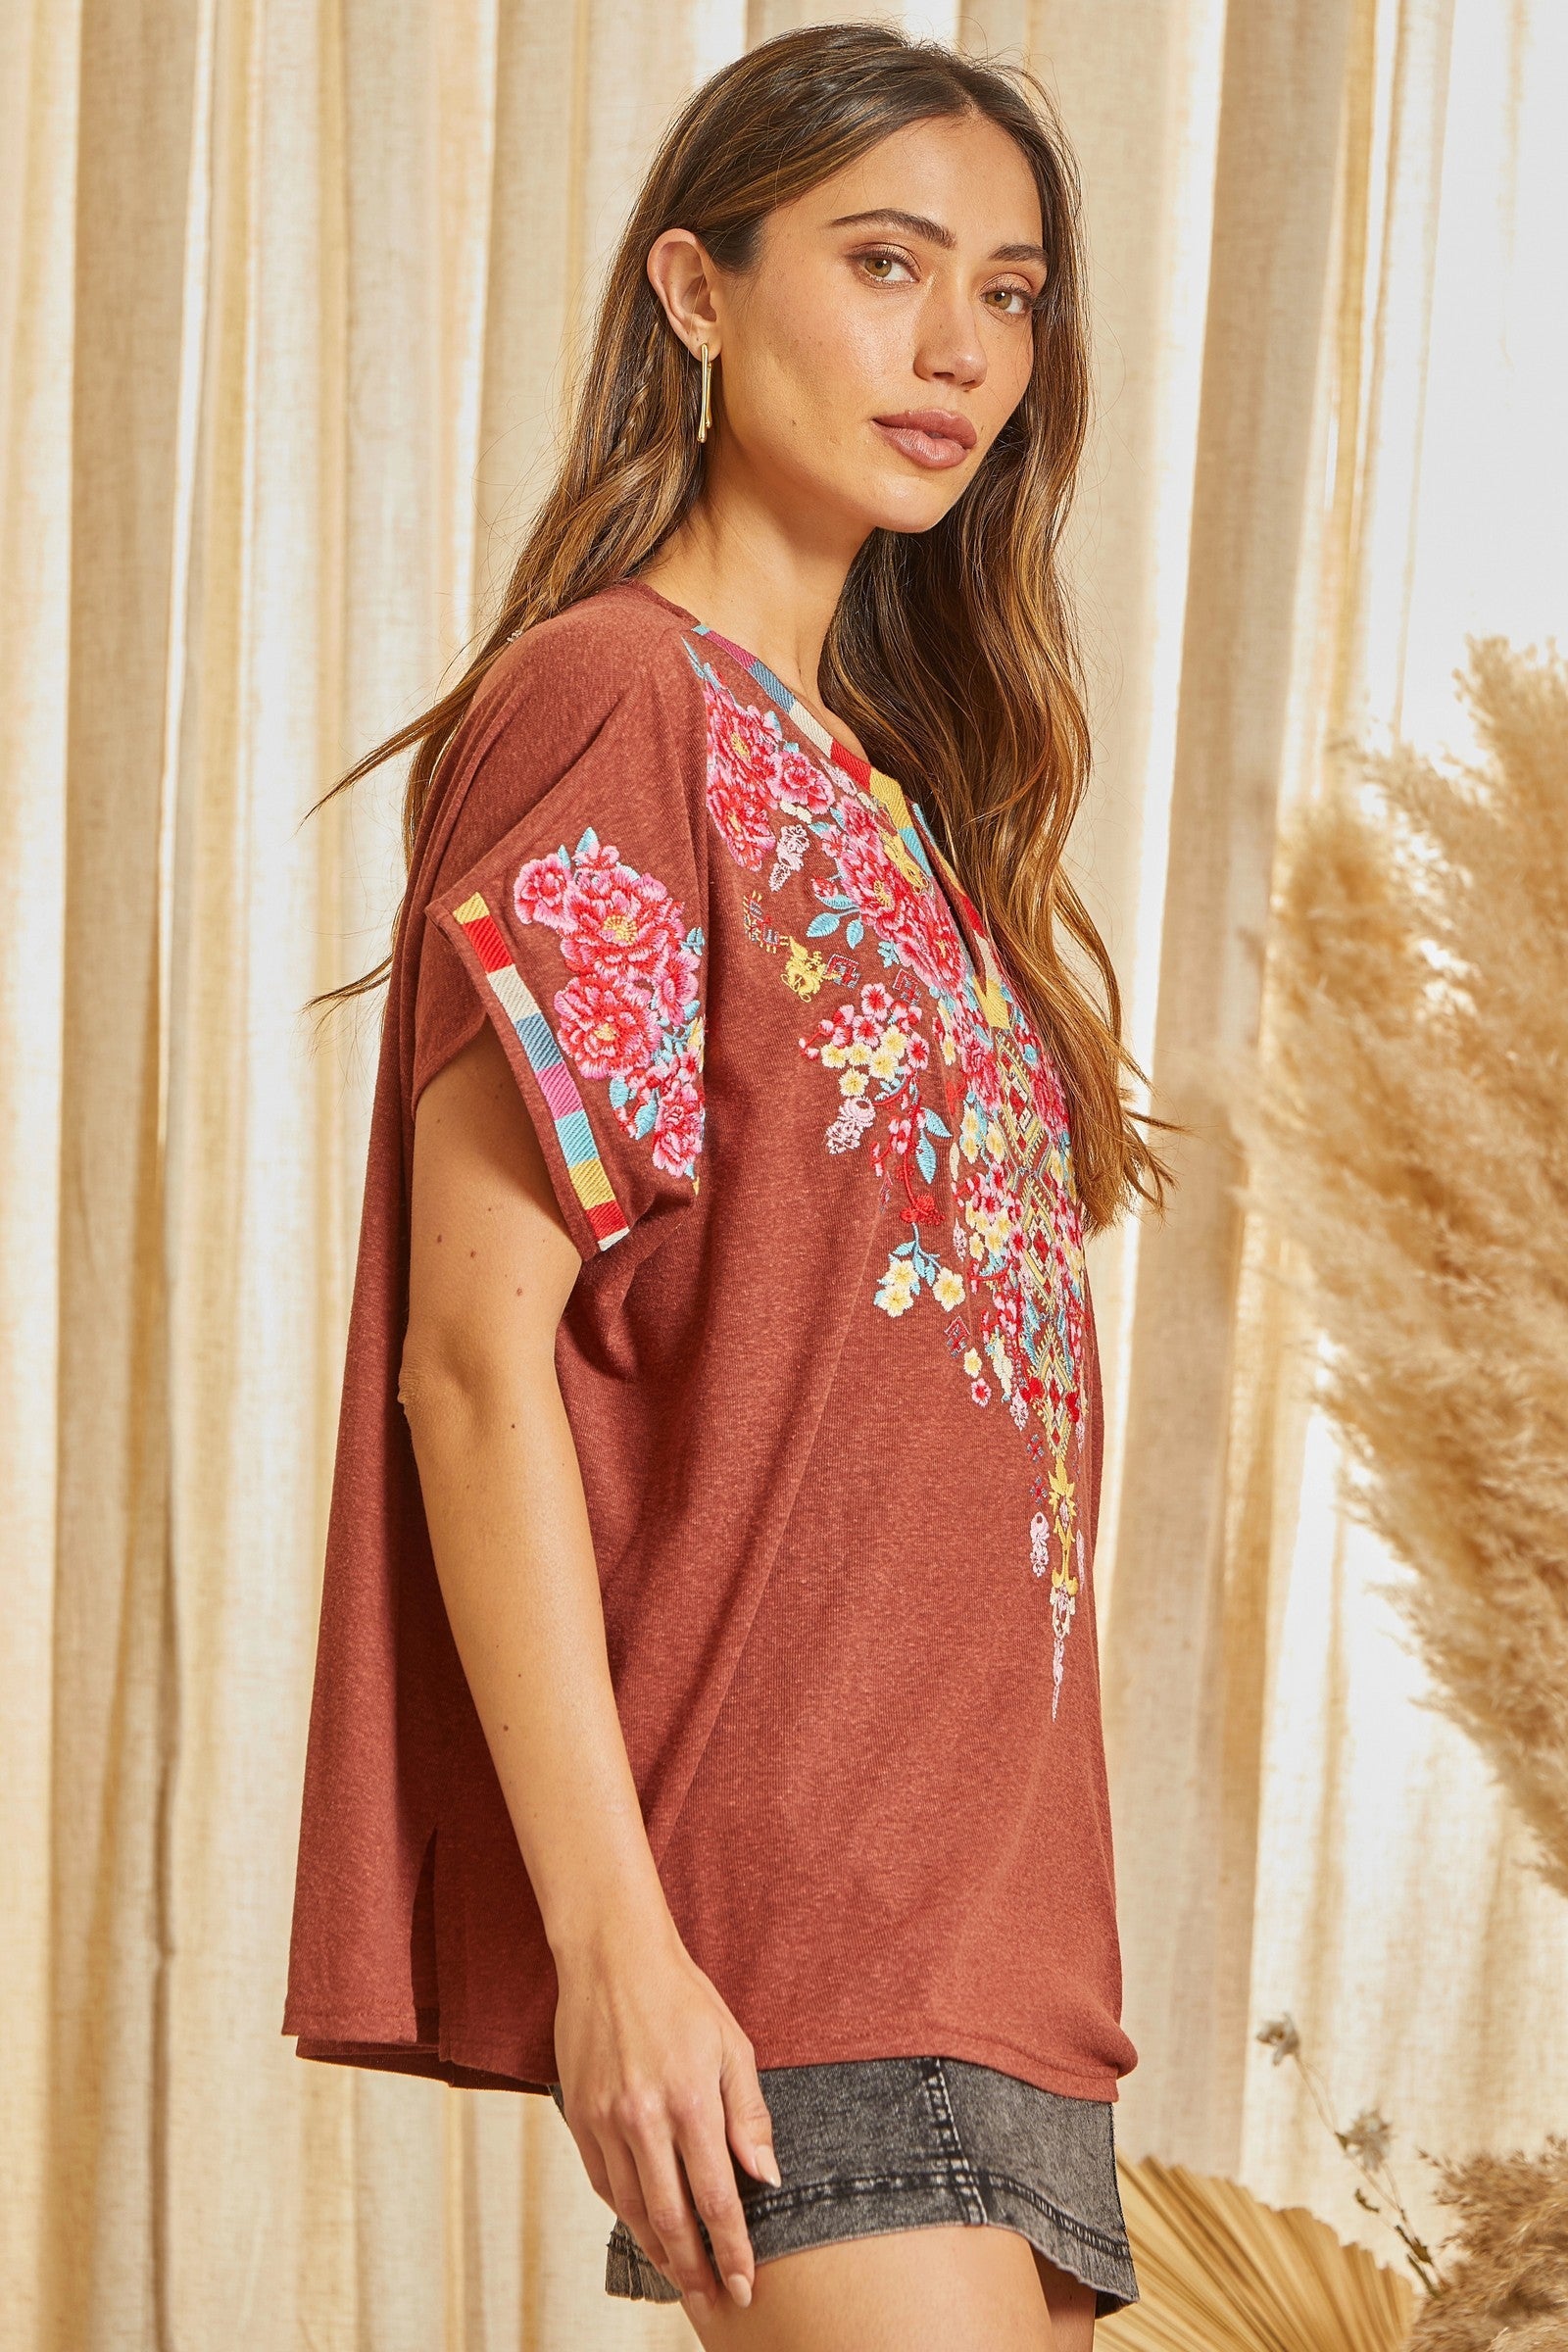 Poncho Top with Floral Embroidery - Curvy Size